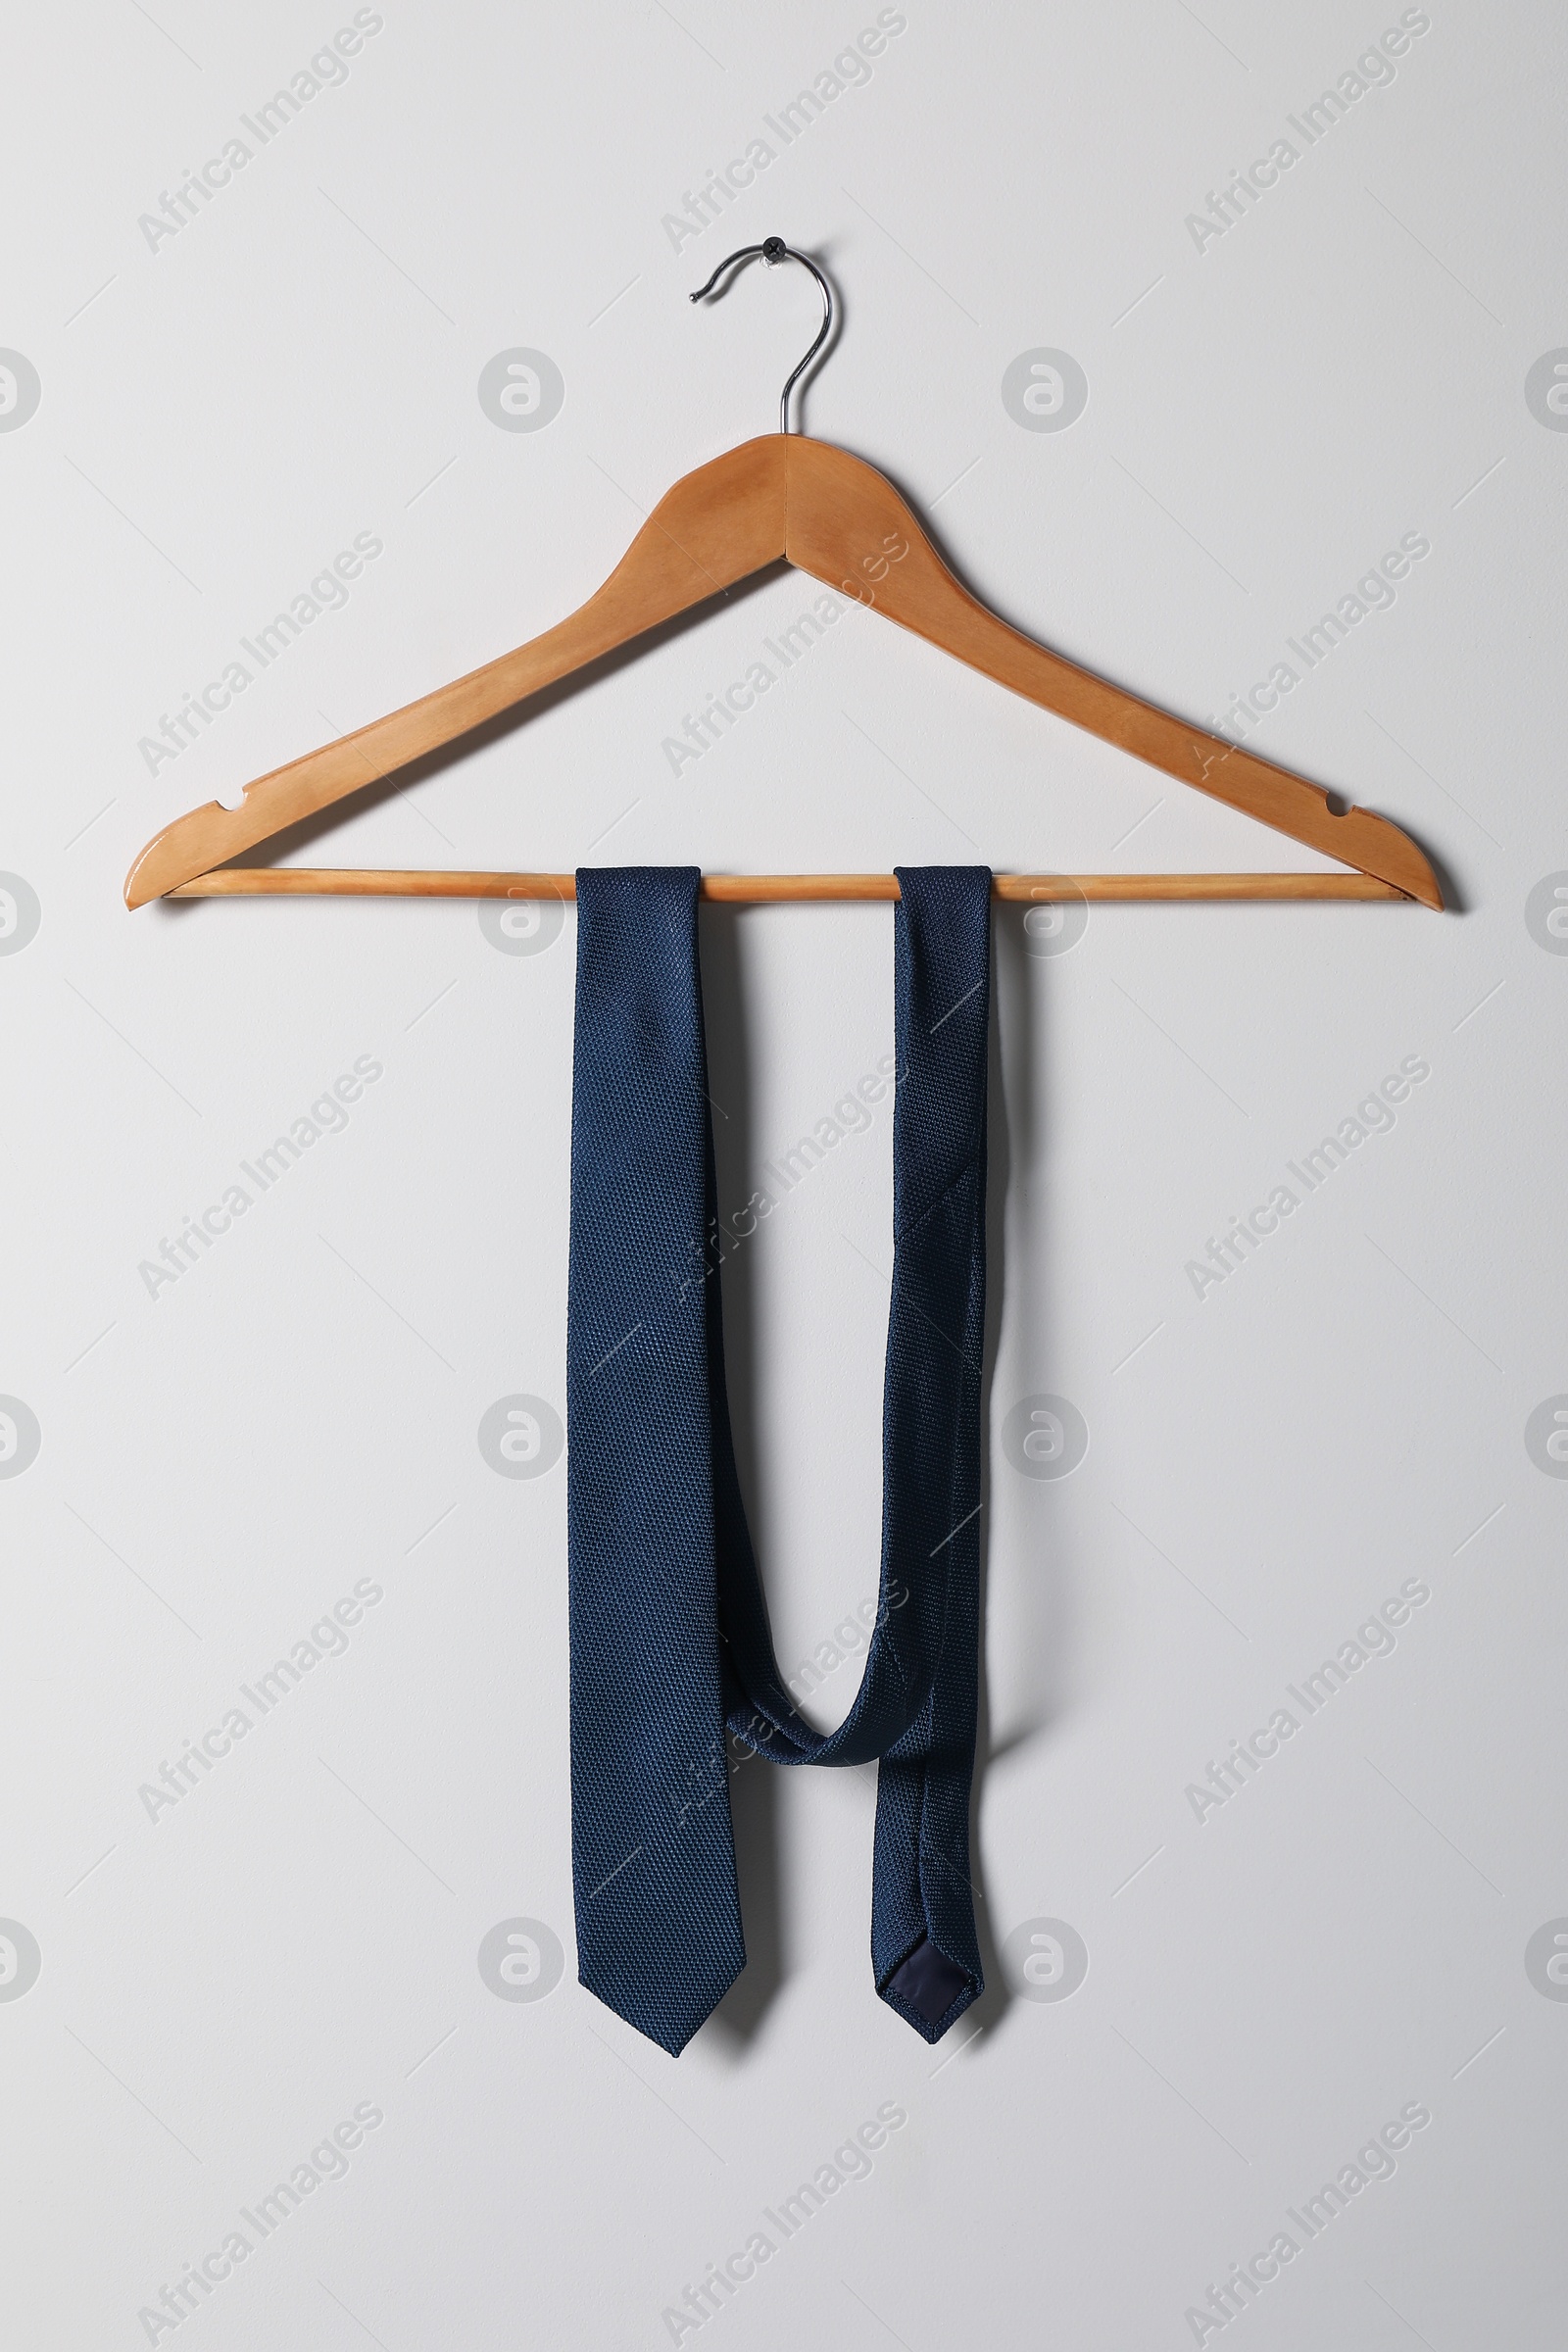 Photo of Hanger with blue necktie on light background